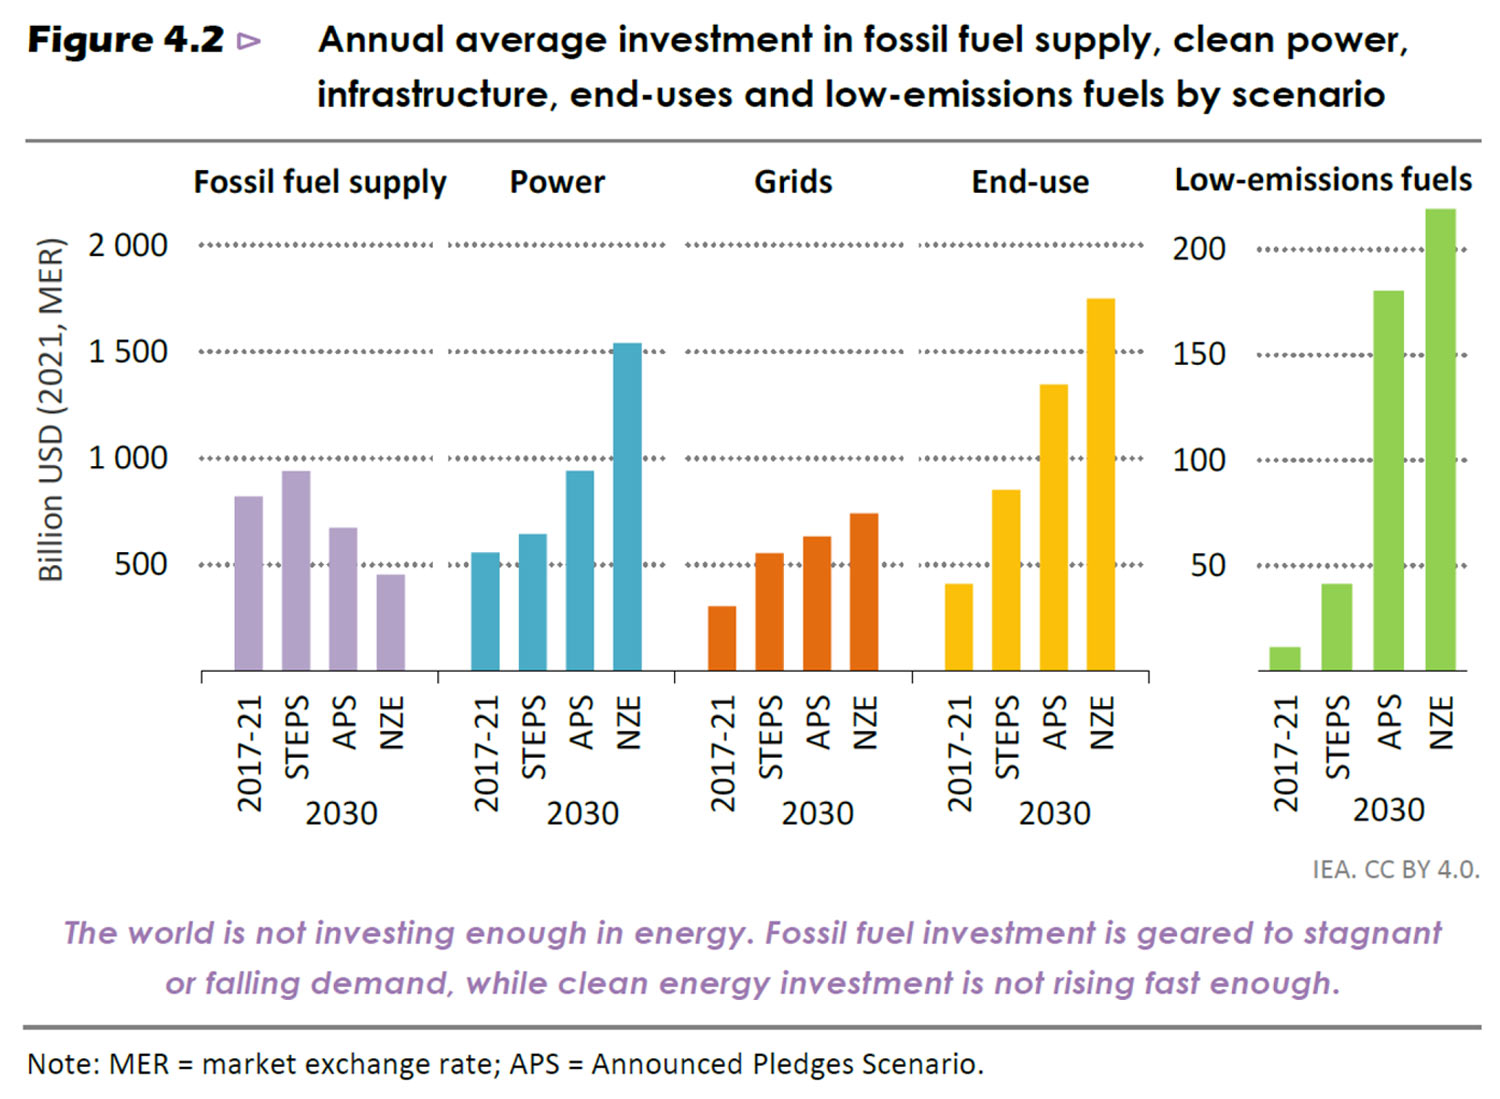 small comparable bar charts illustrating the annual average investment in fossil fuel supply, clean power, infrastructure, end-uses and low-emission fuels by scenario